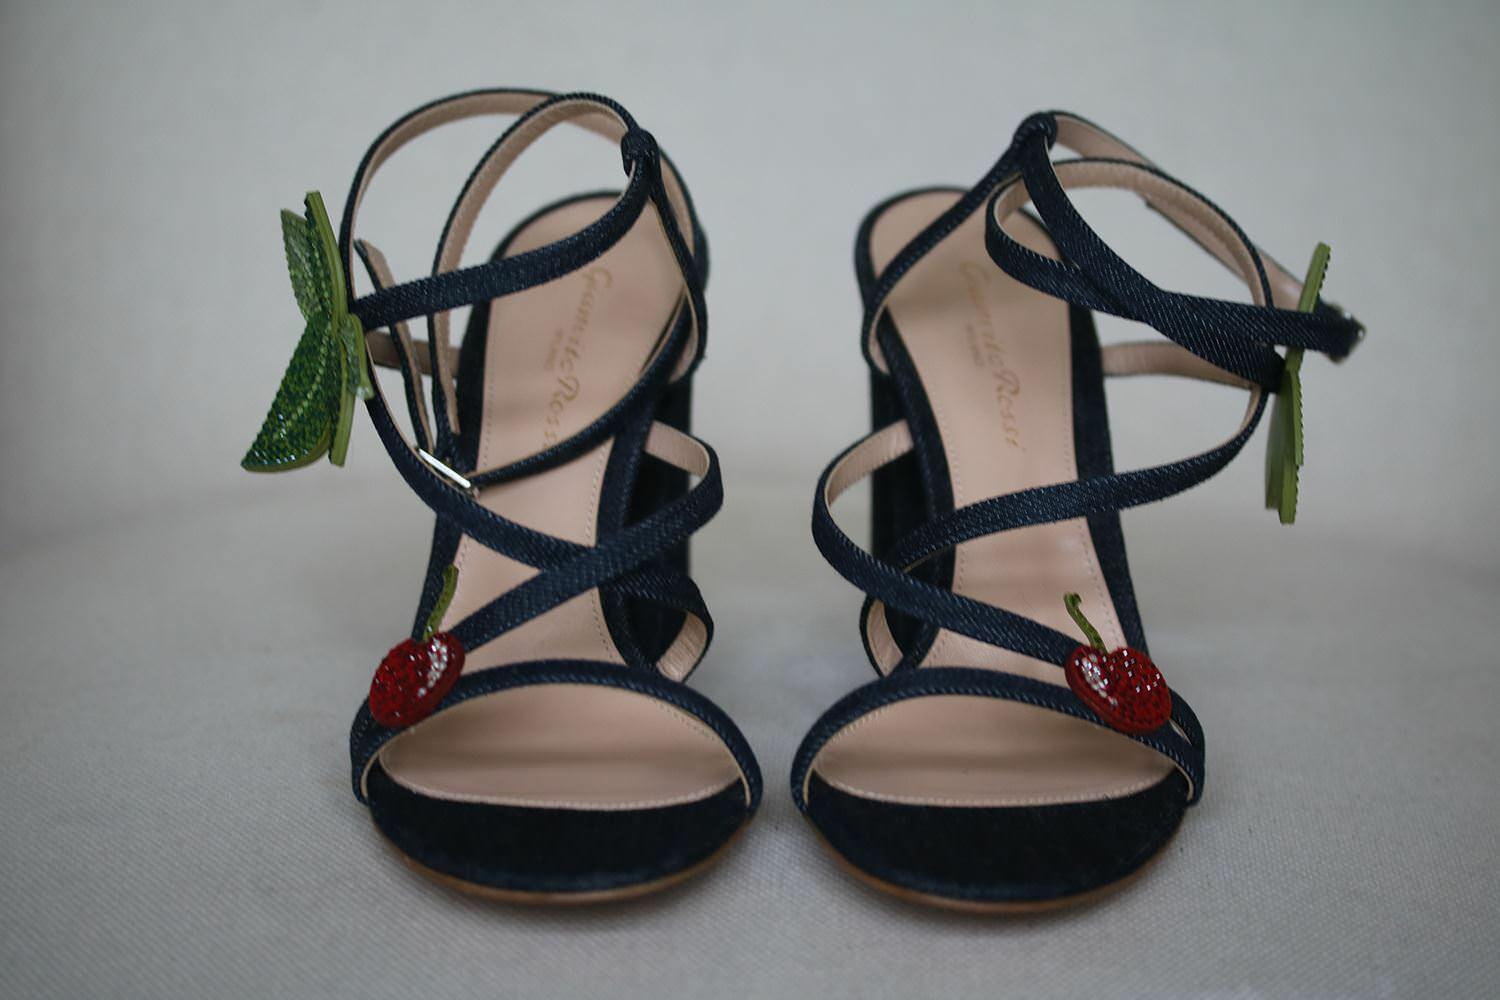 Blue denim sandal covered block heel featuring a crystal cherry applique from Gianvito Rossi. Item fits true to size. 100% Cotton. Colour: blue. Heel measurea approx. 3.9 inches. Does not come with a box. 

Size: EU 37.5 (UK 4.5, US 7.5)

Condition: